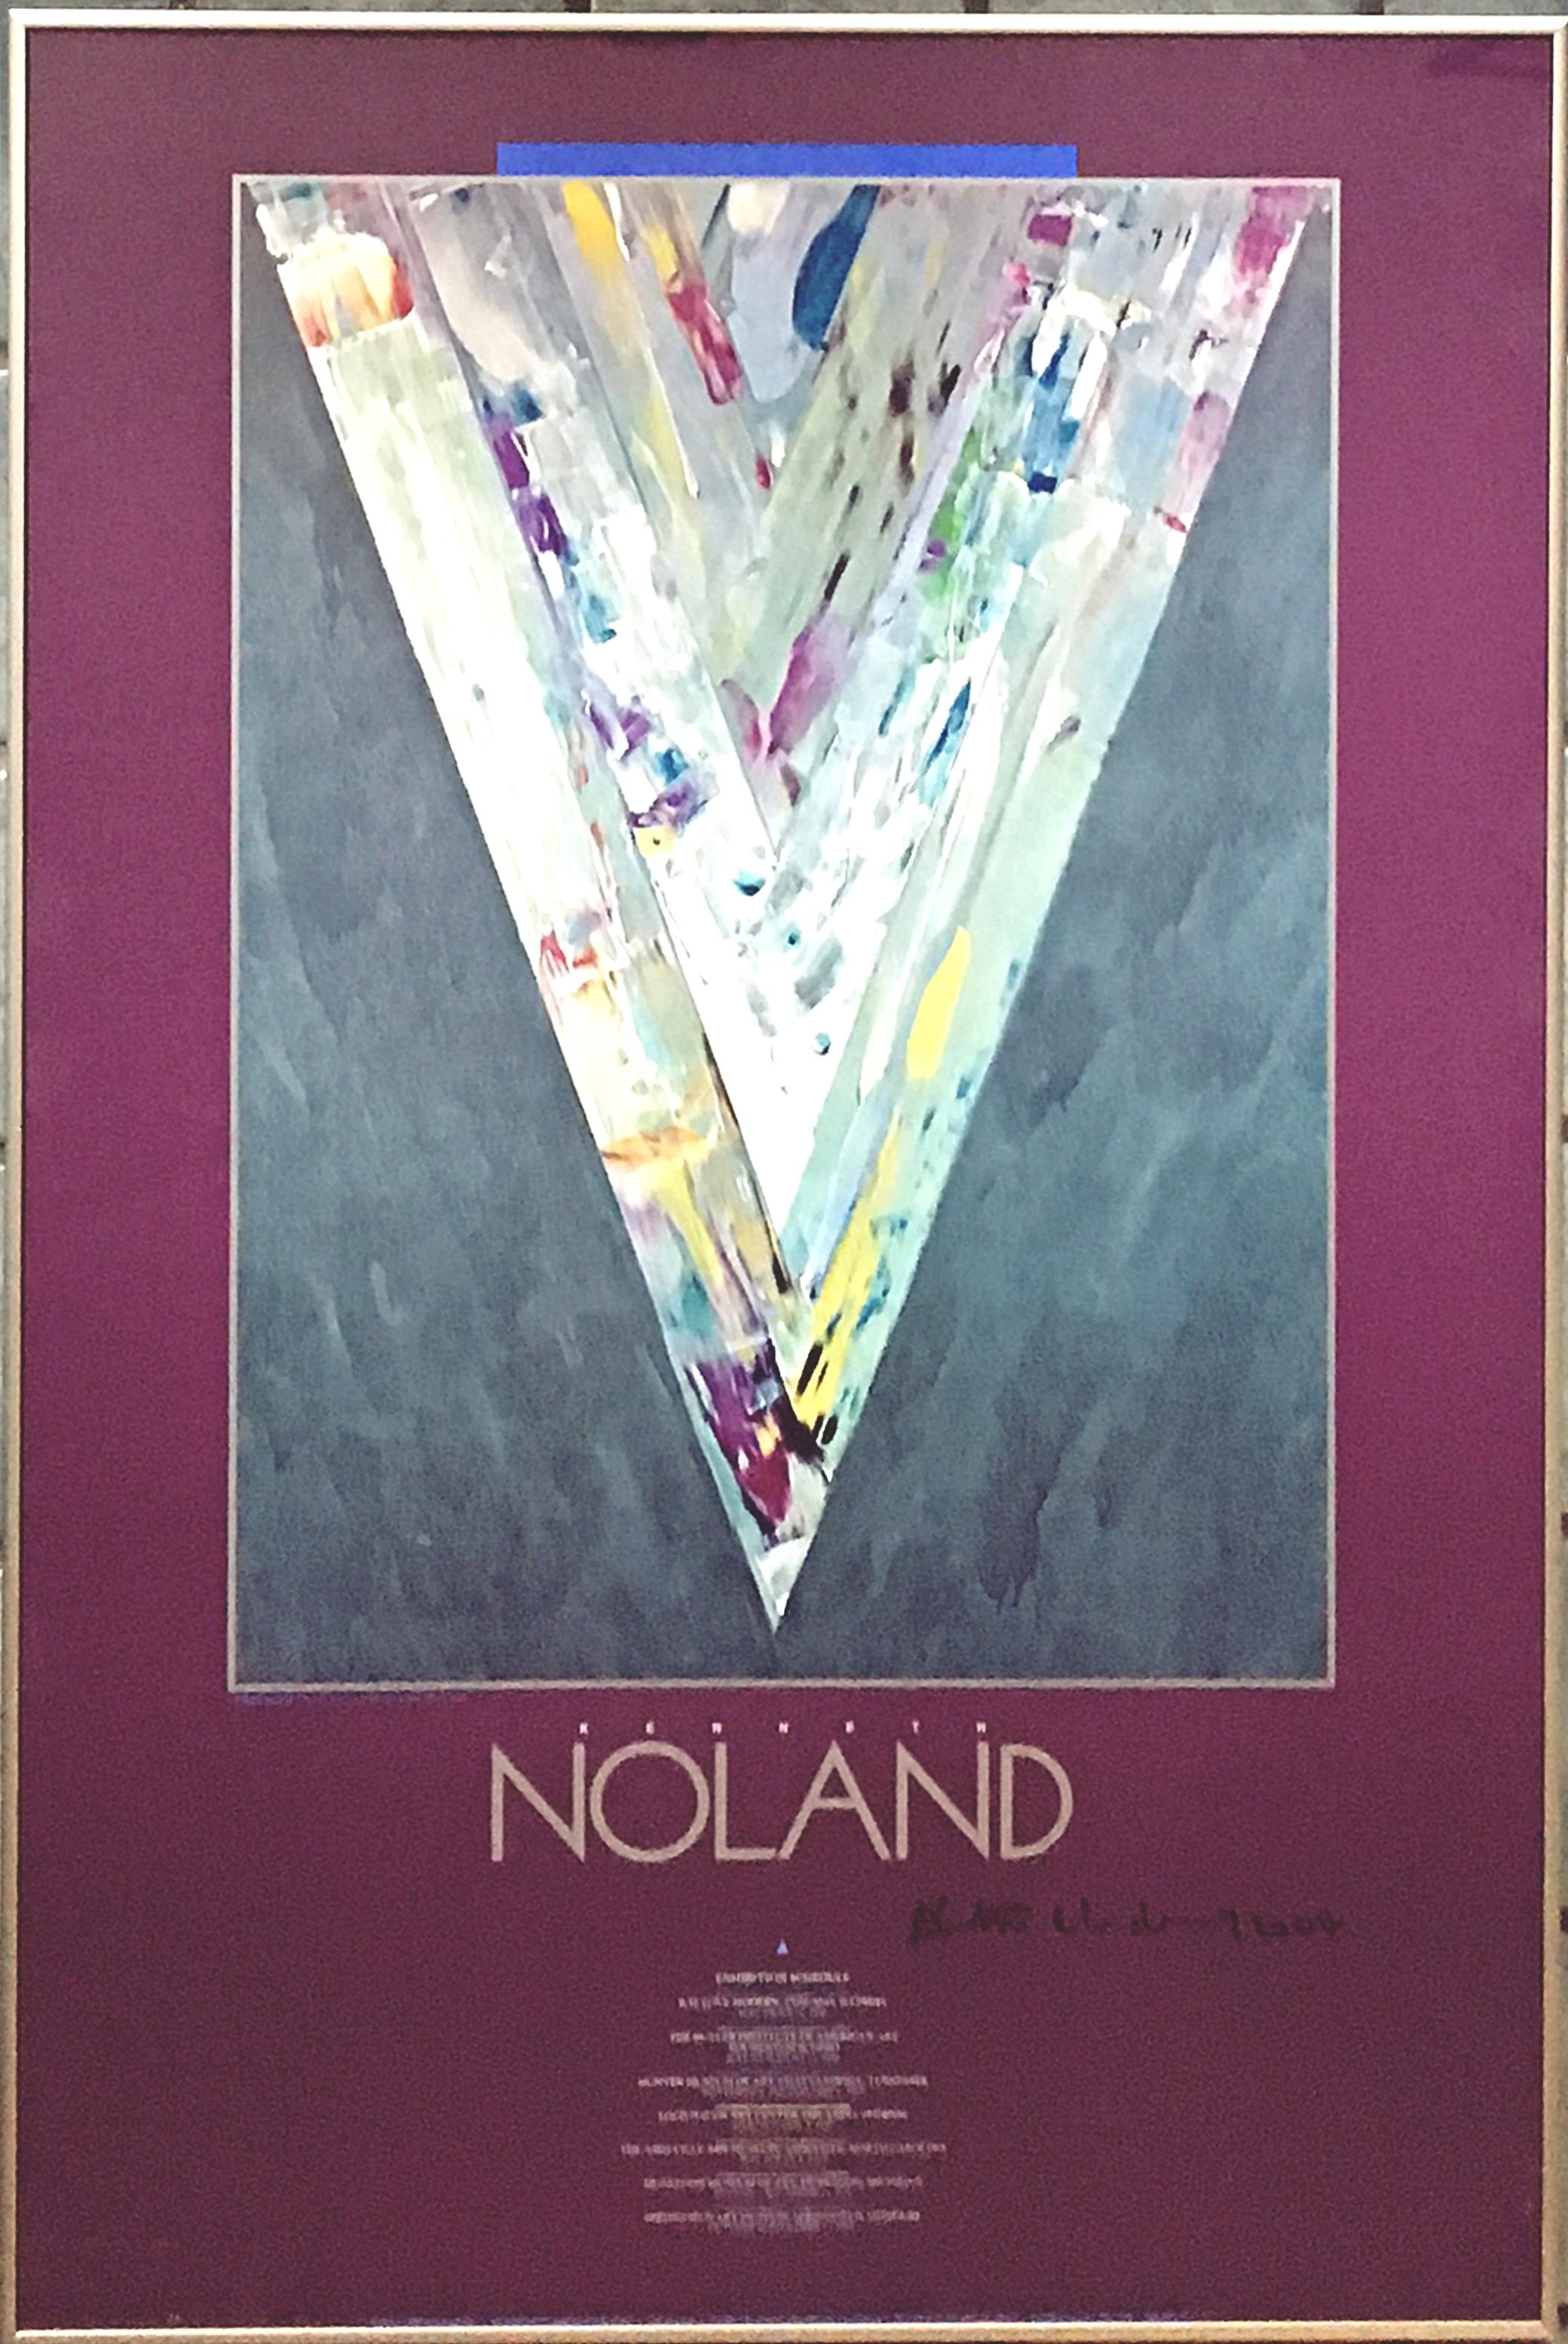 NOLAND (Hand Signed) - Print by Kenneth Noland